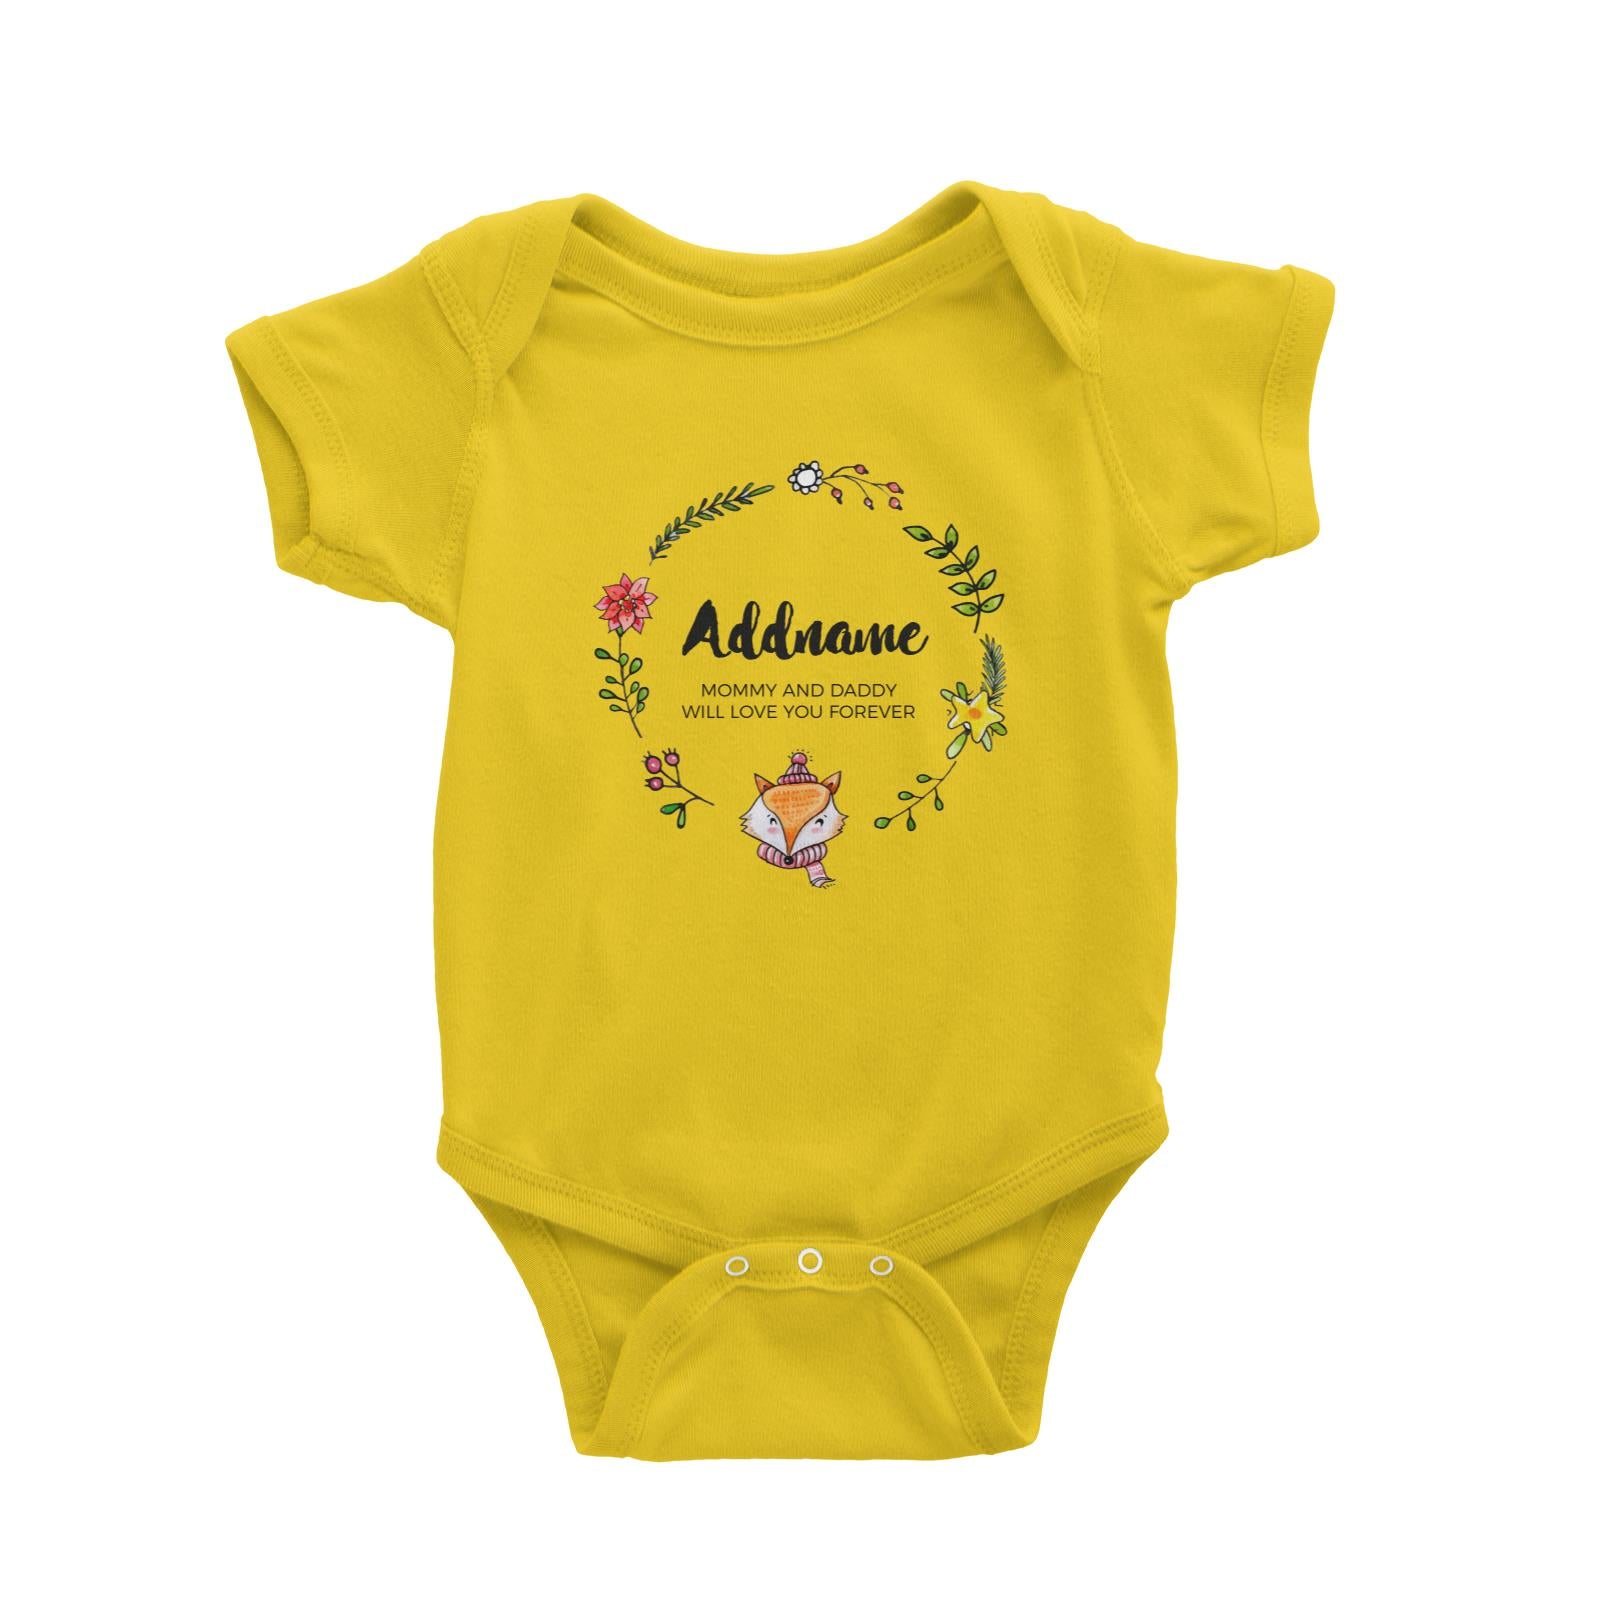 Doodle Green Wreath with Cute Fox Personalizable with Name and Text Baby Romper